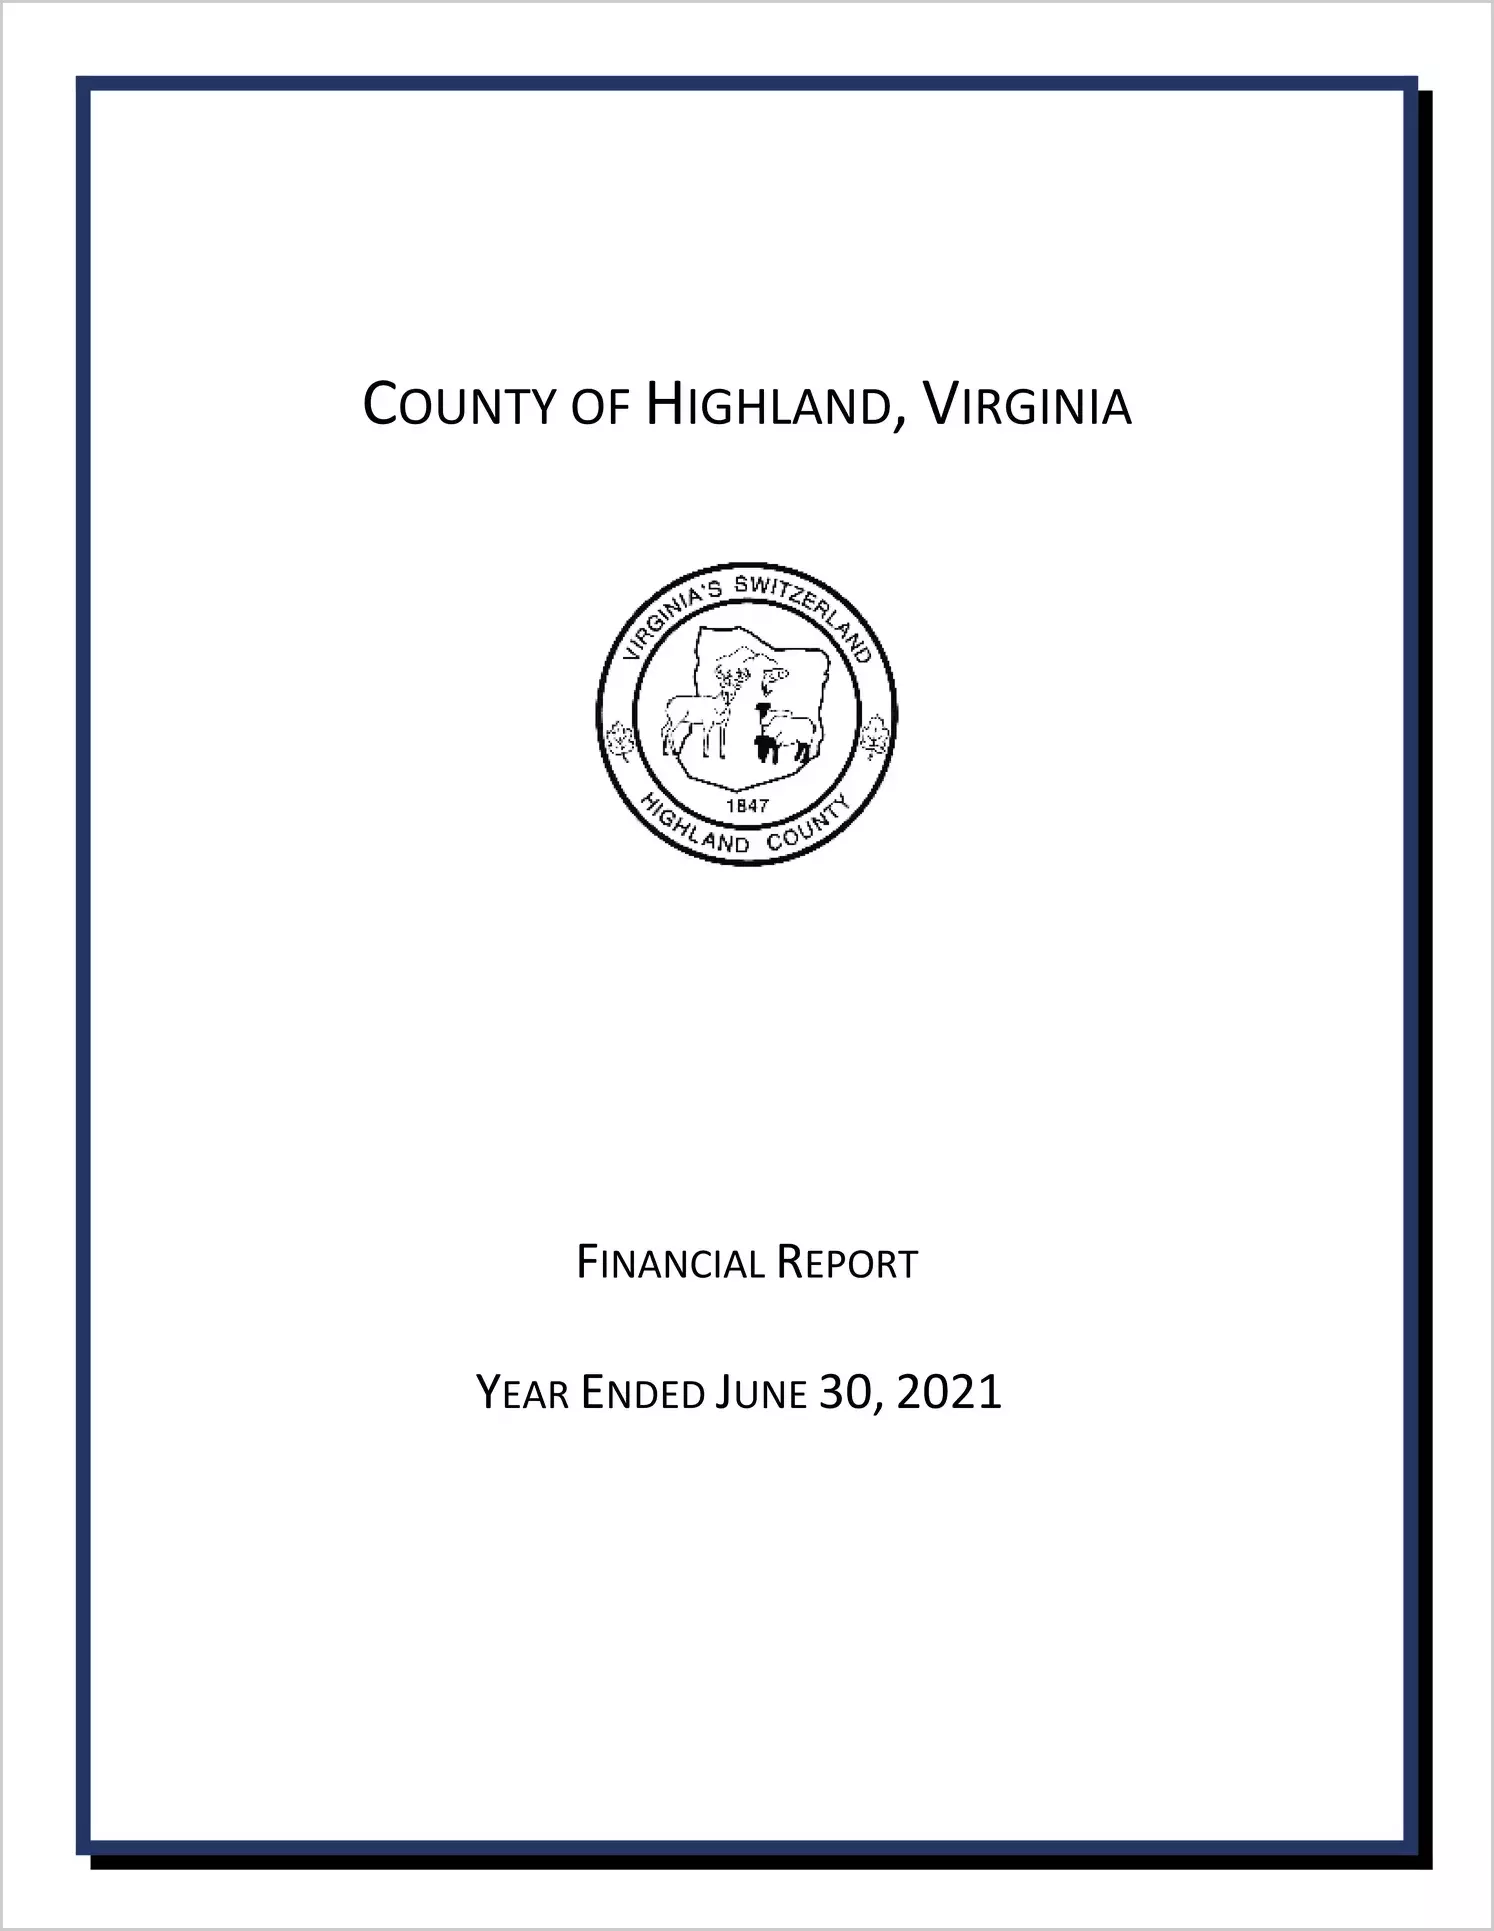 2021 Annual Financial Report for County of Highland